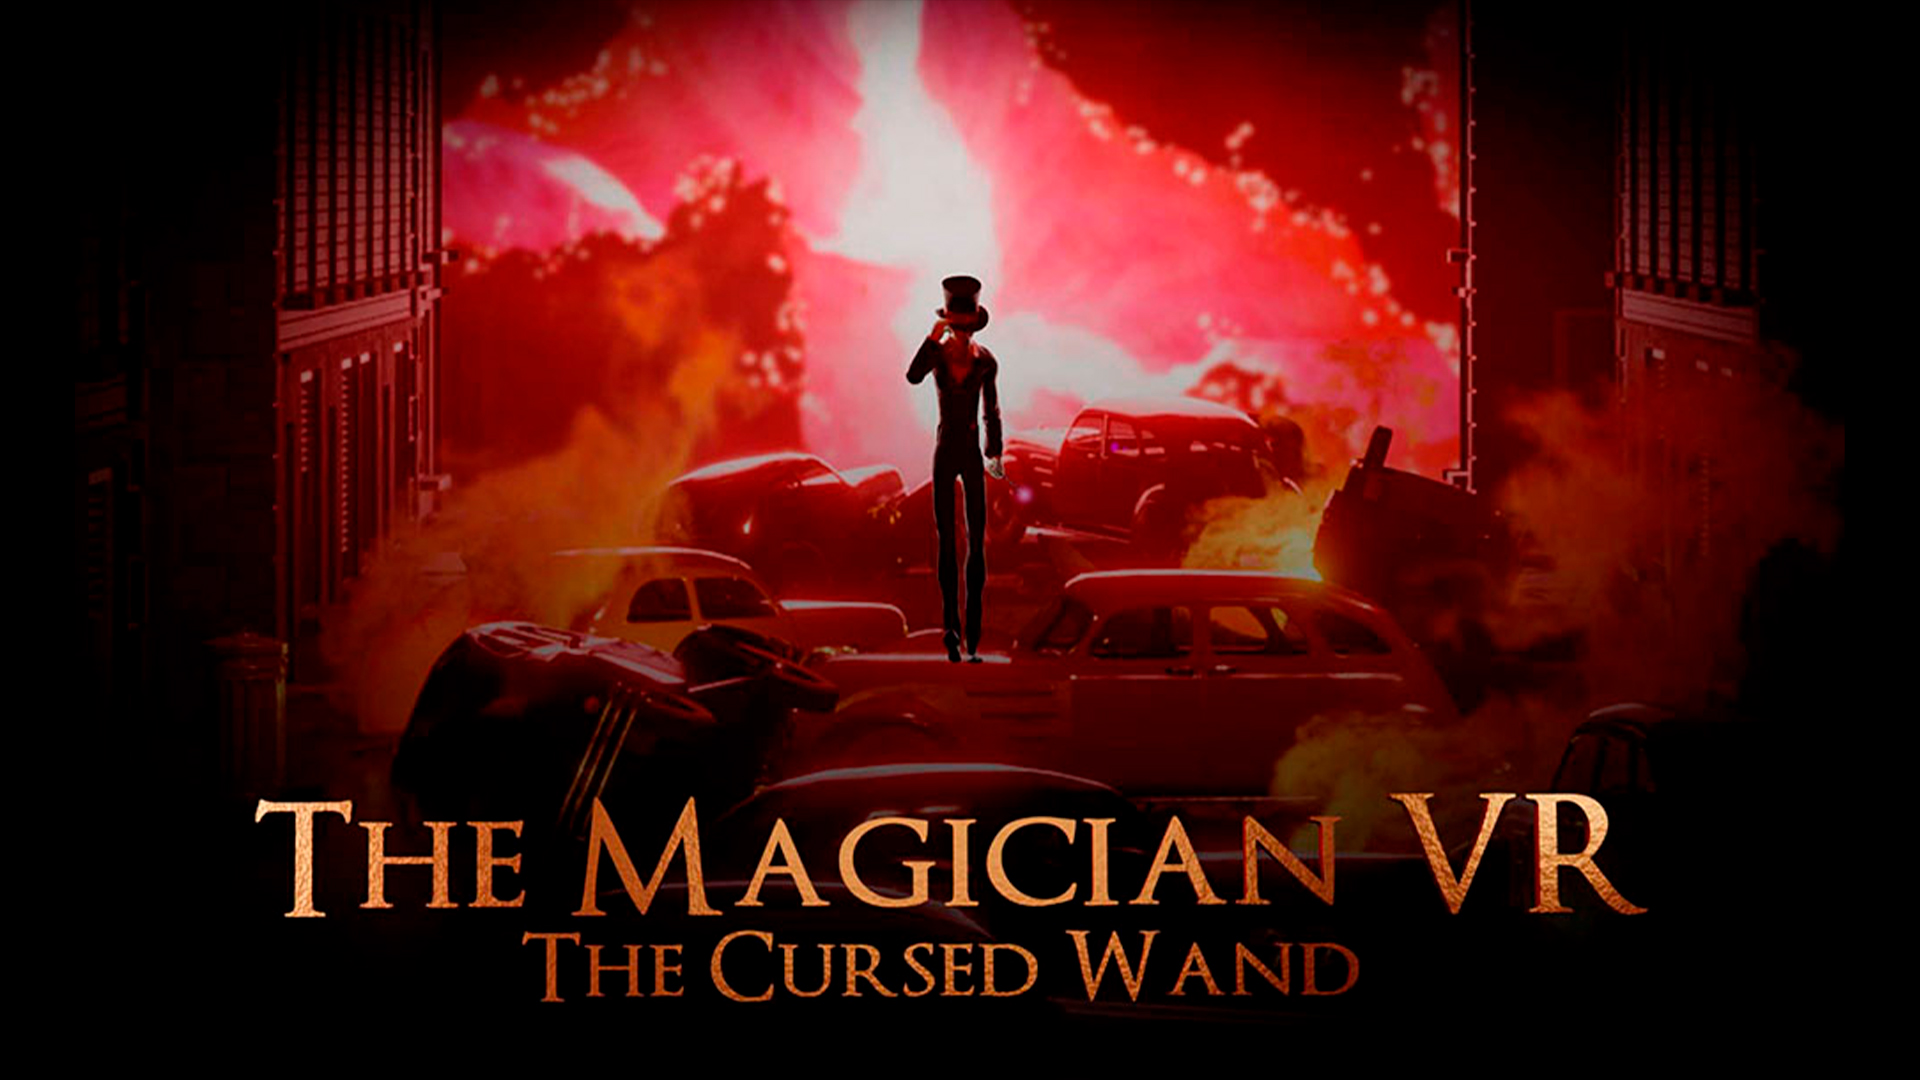 The Magician VR 1080